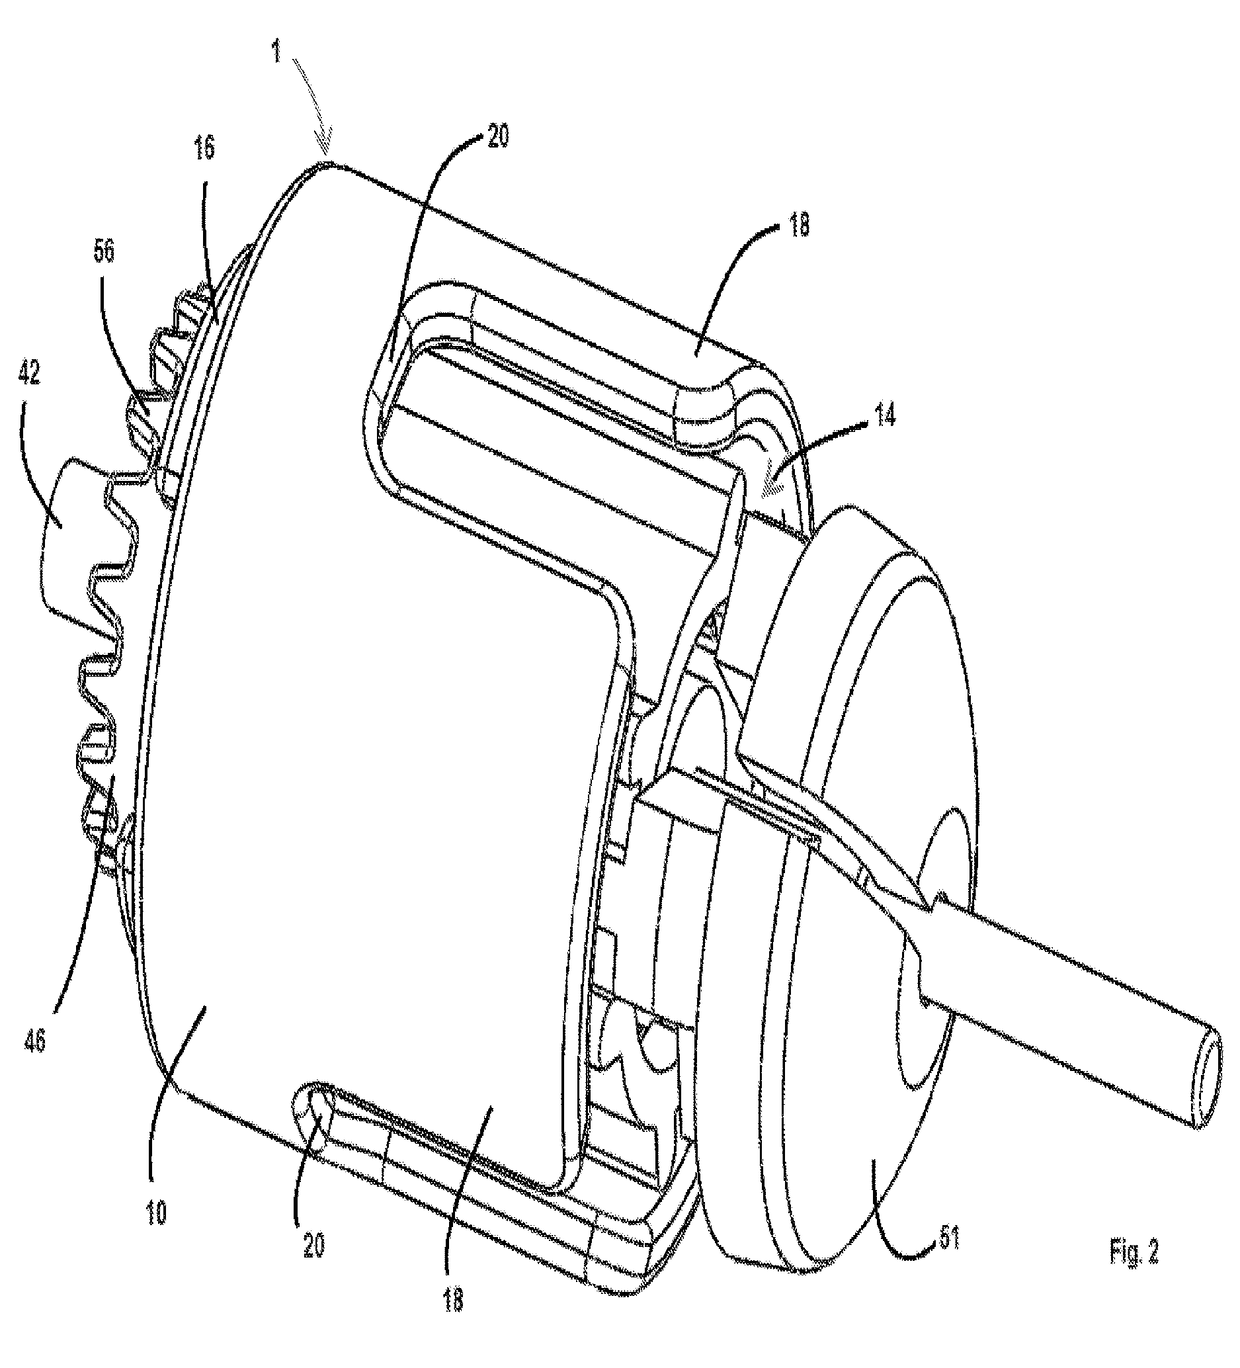 Flexible coupling system